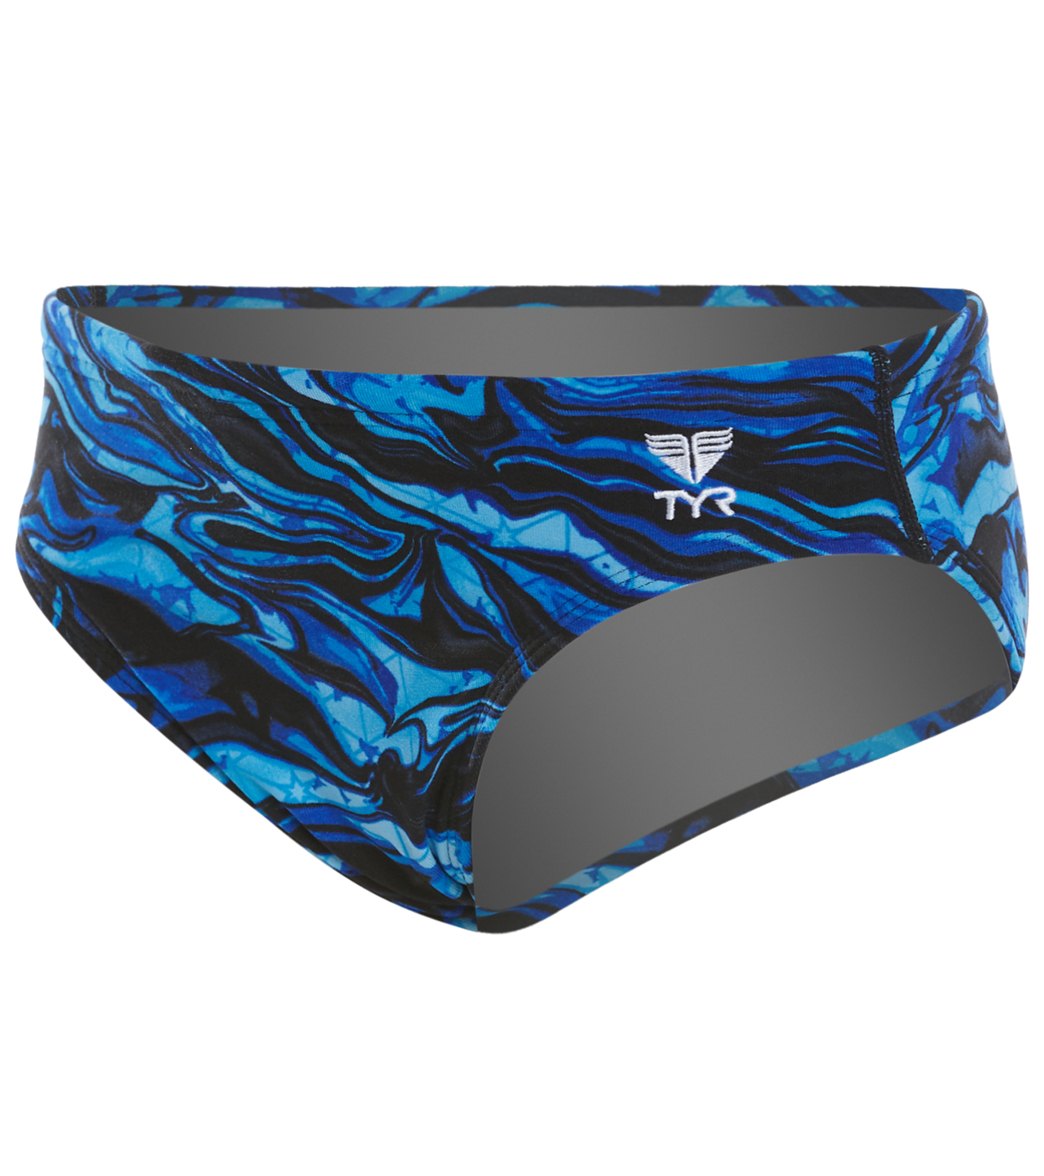 TYR Miramar Allover Racer Brief Swimsuit - Blue 24 Polyester/Spandex - Swimoutlet.com